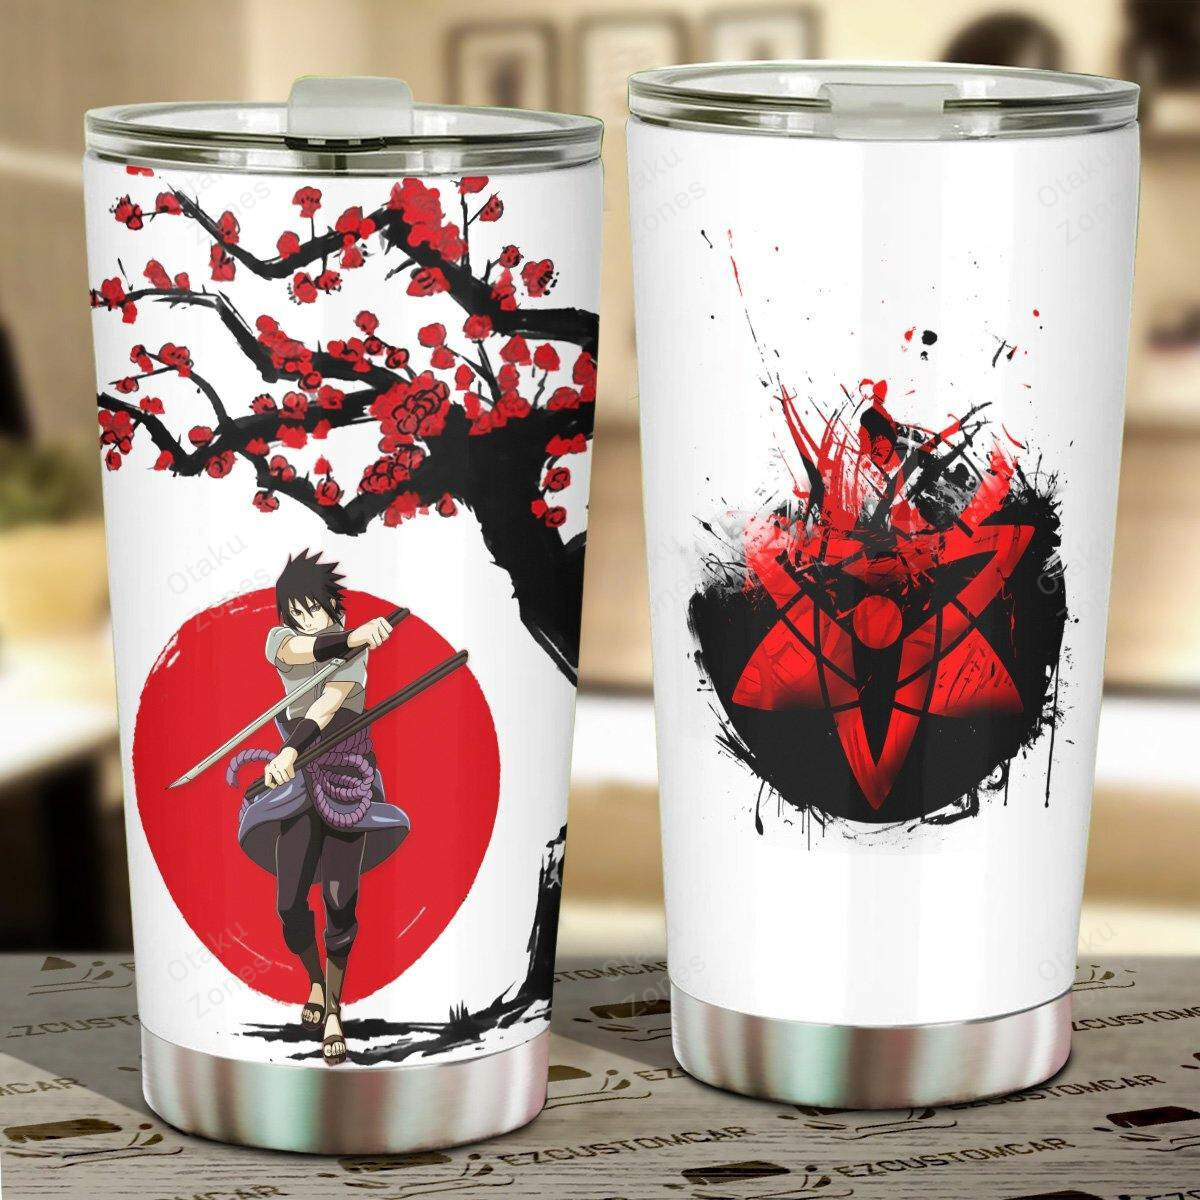 Go ahead and order your new tumbler now! 127